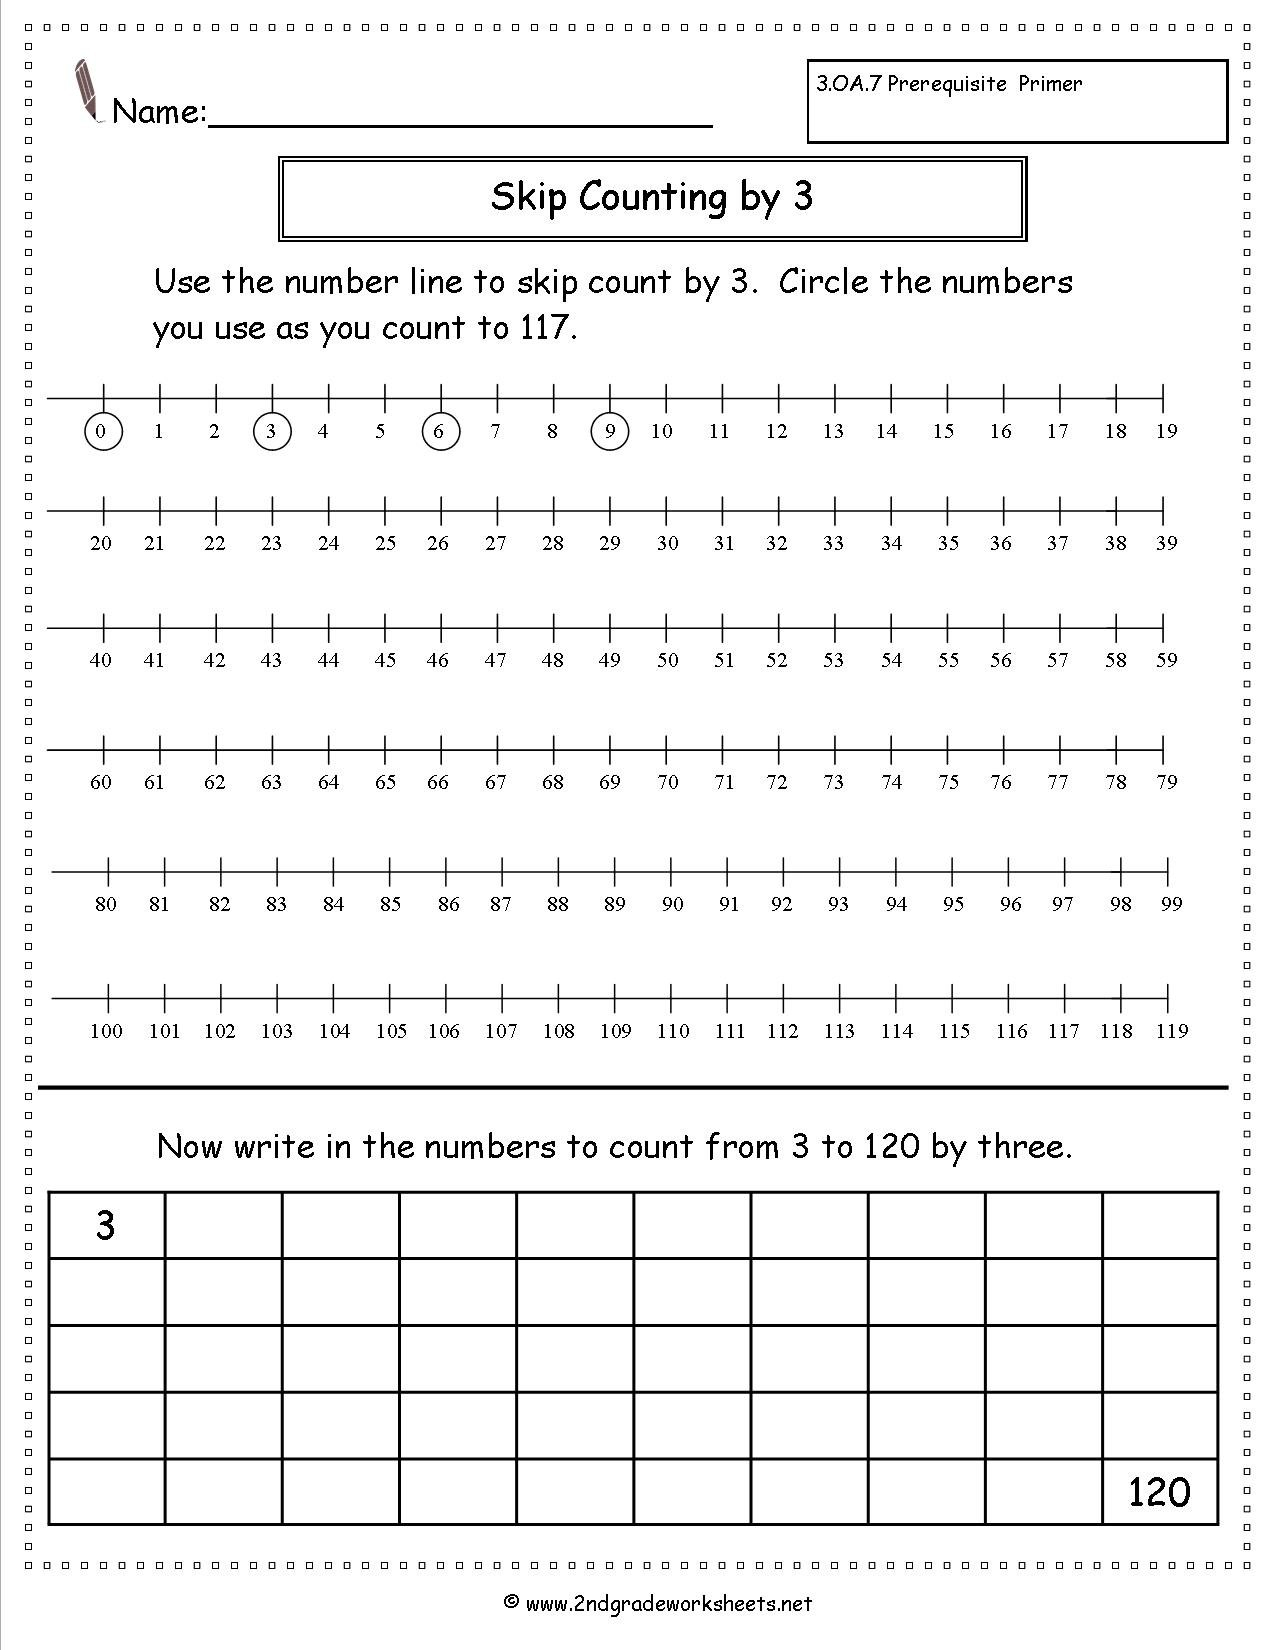 Free Skip Counting Worksheets As Well As Skip Counting By 3 Worksheet